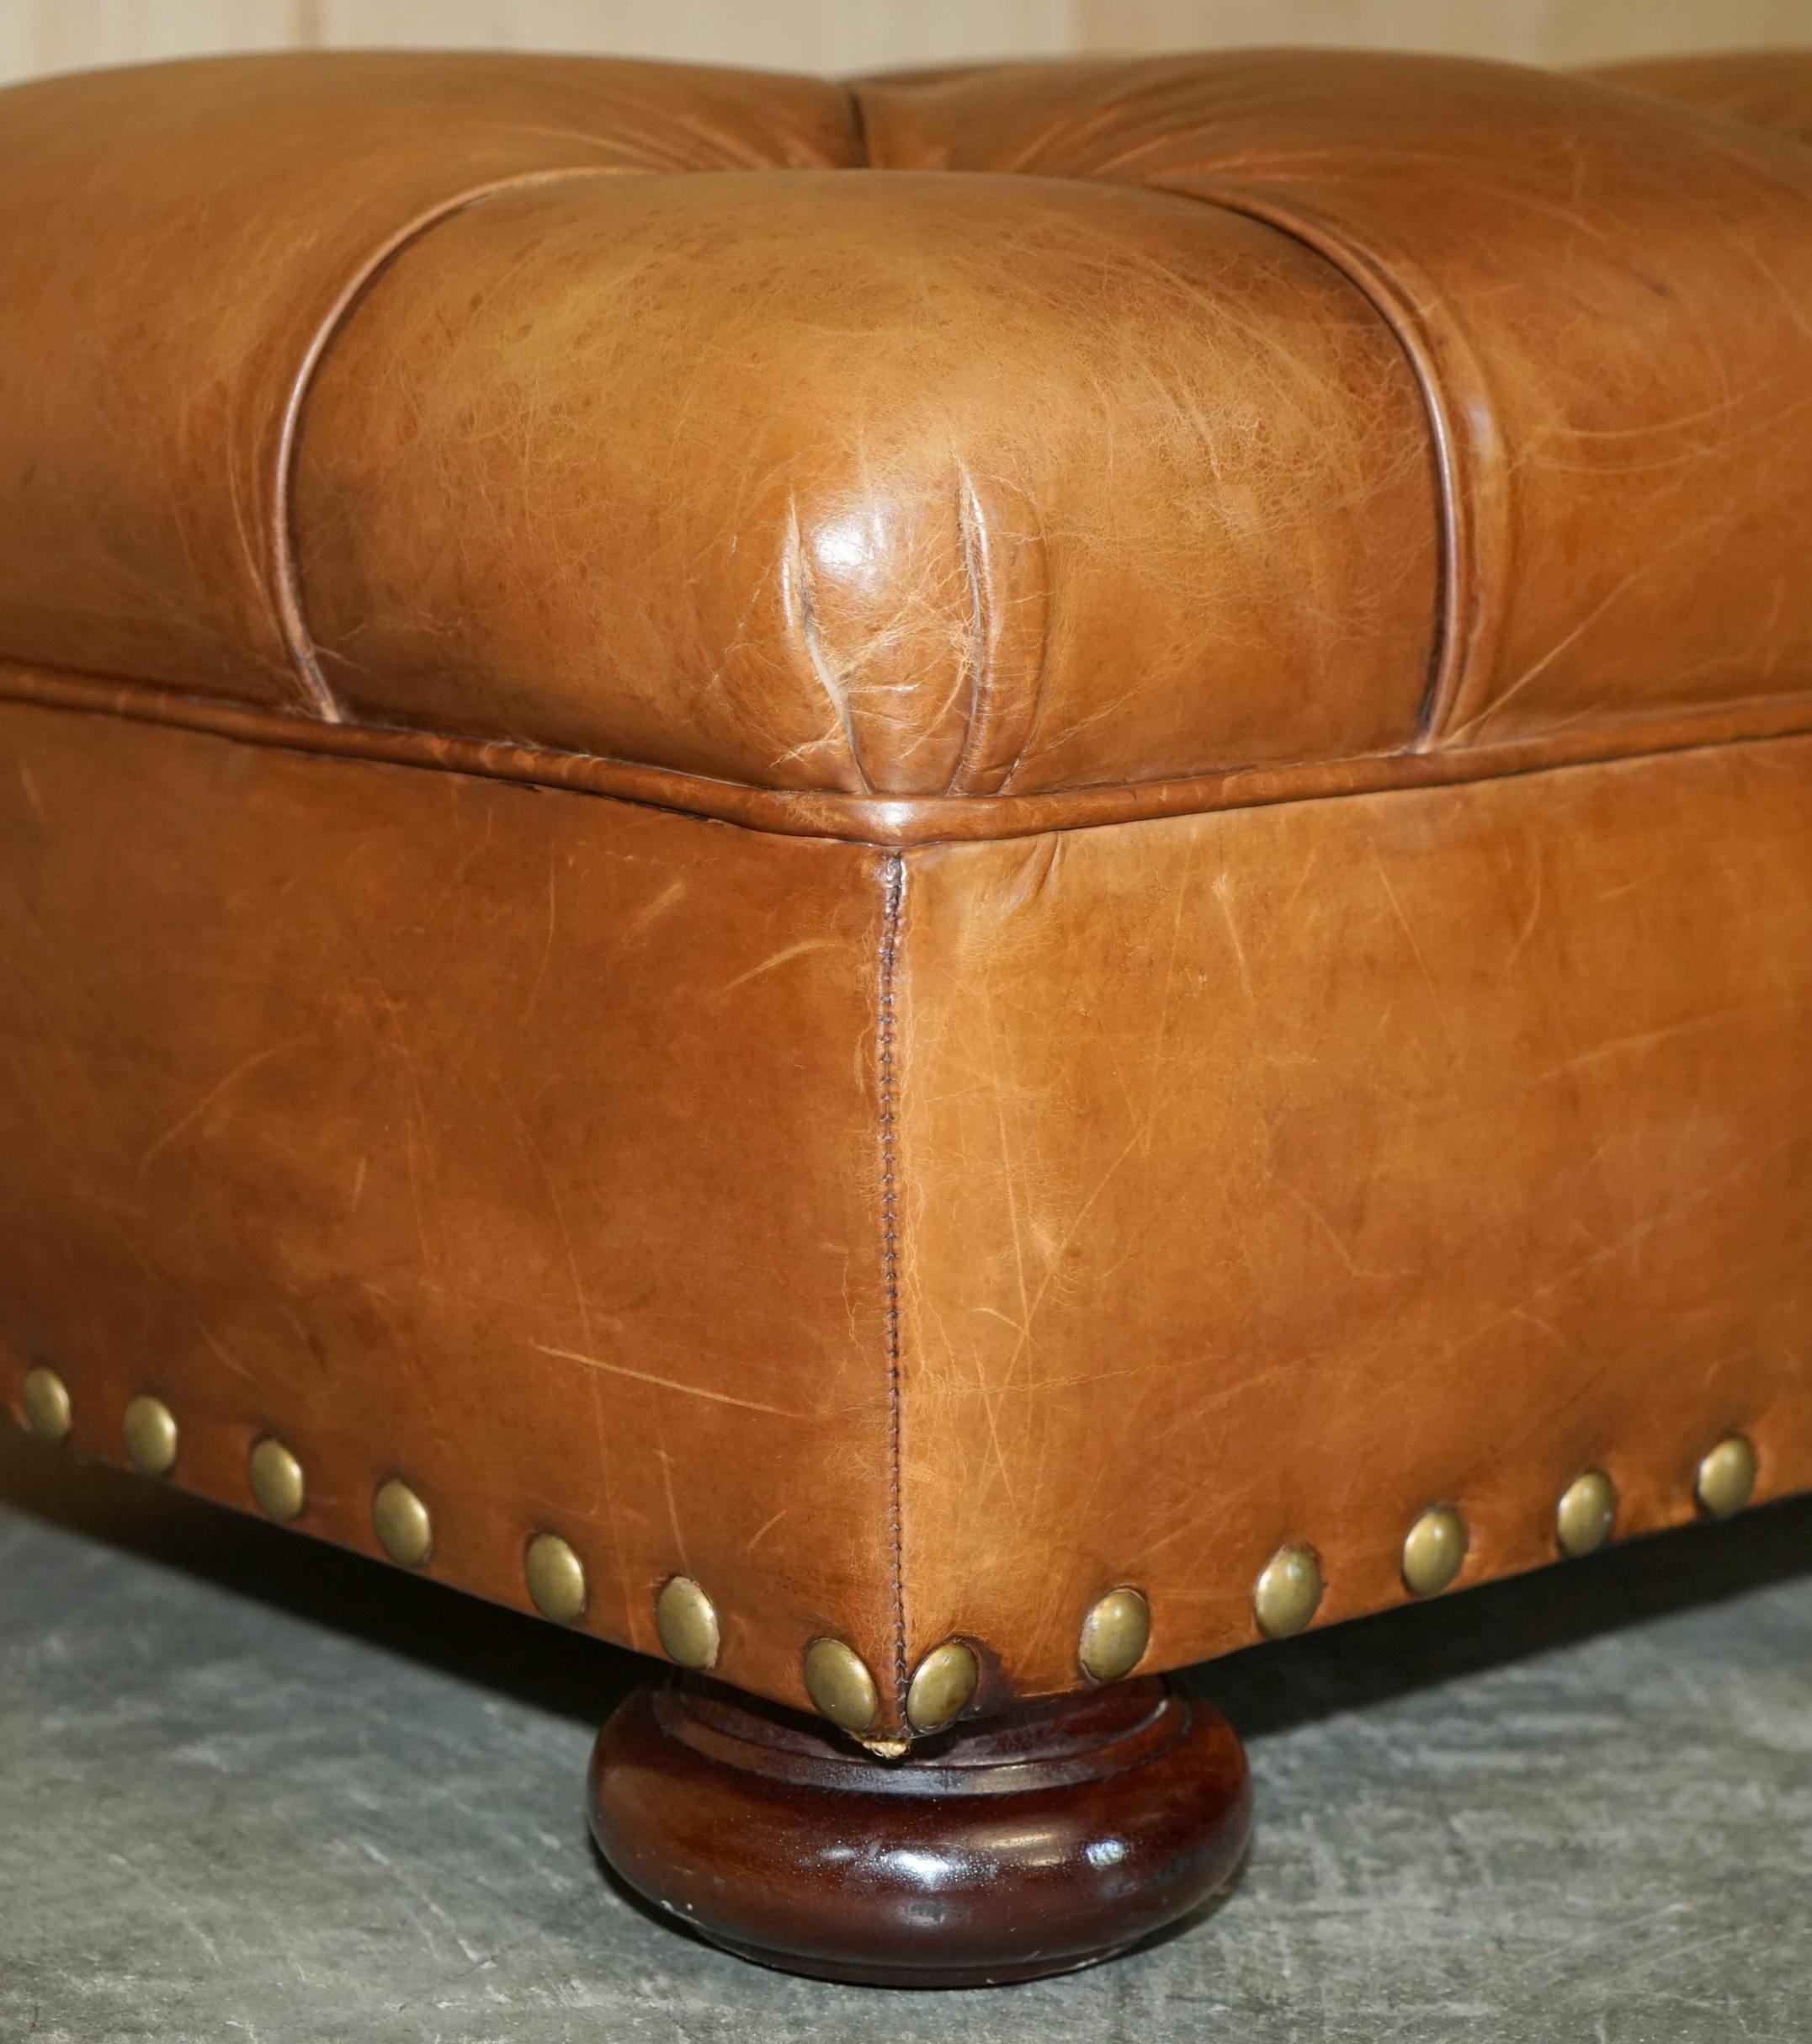 20th Century RALPH LAUREN WRITER'S CHESTERFIELD FOOTSTOOL OTTOMAN IN HERiTAGE BROWN LEATHER